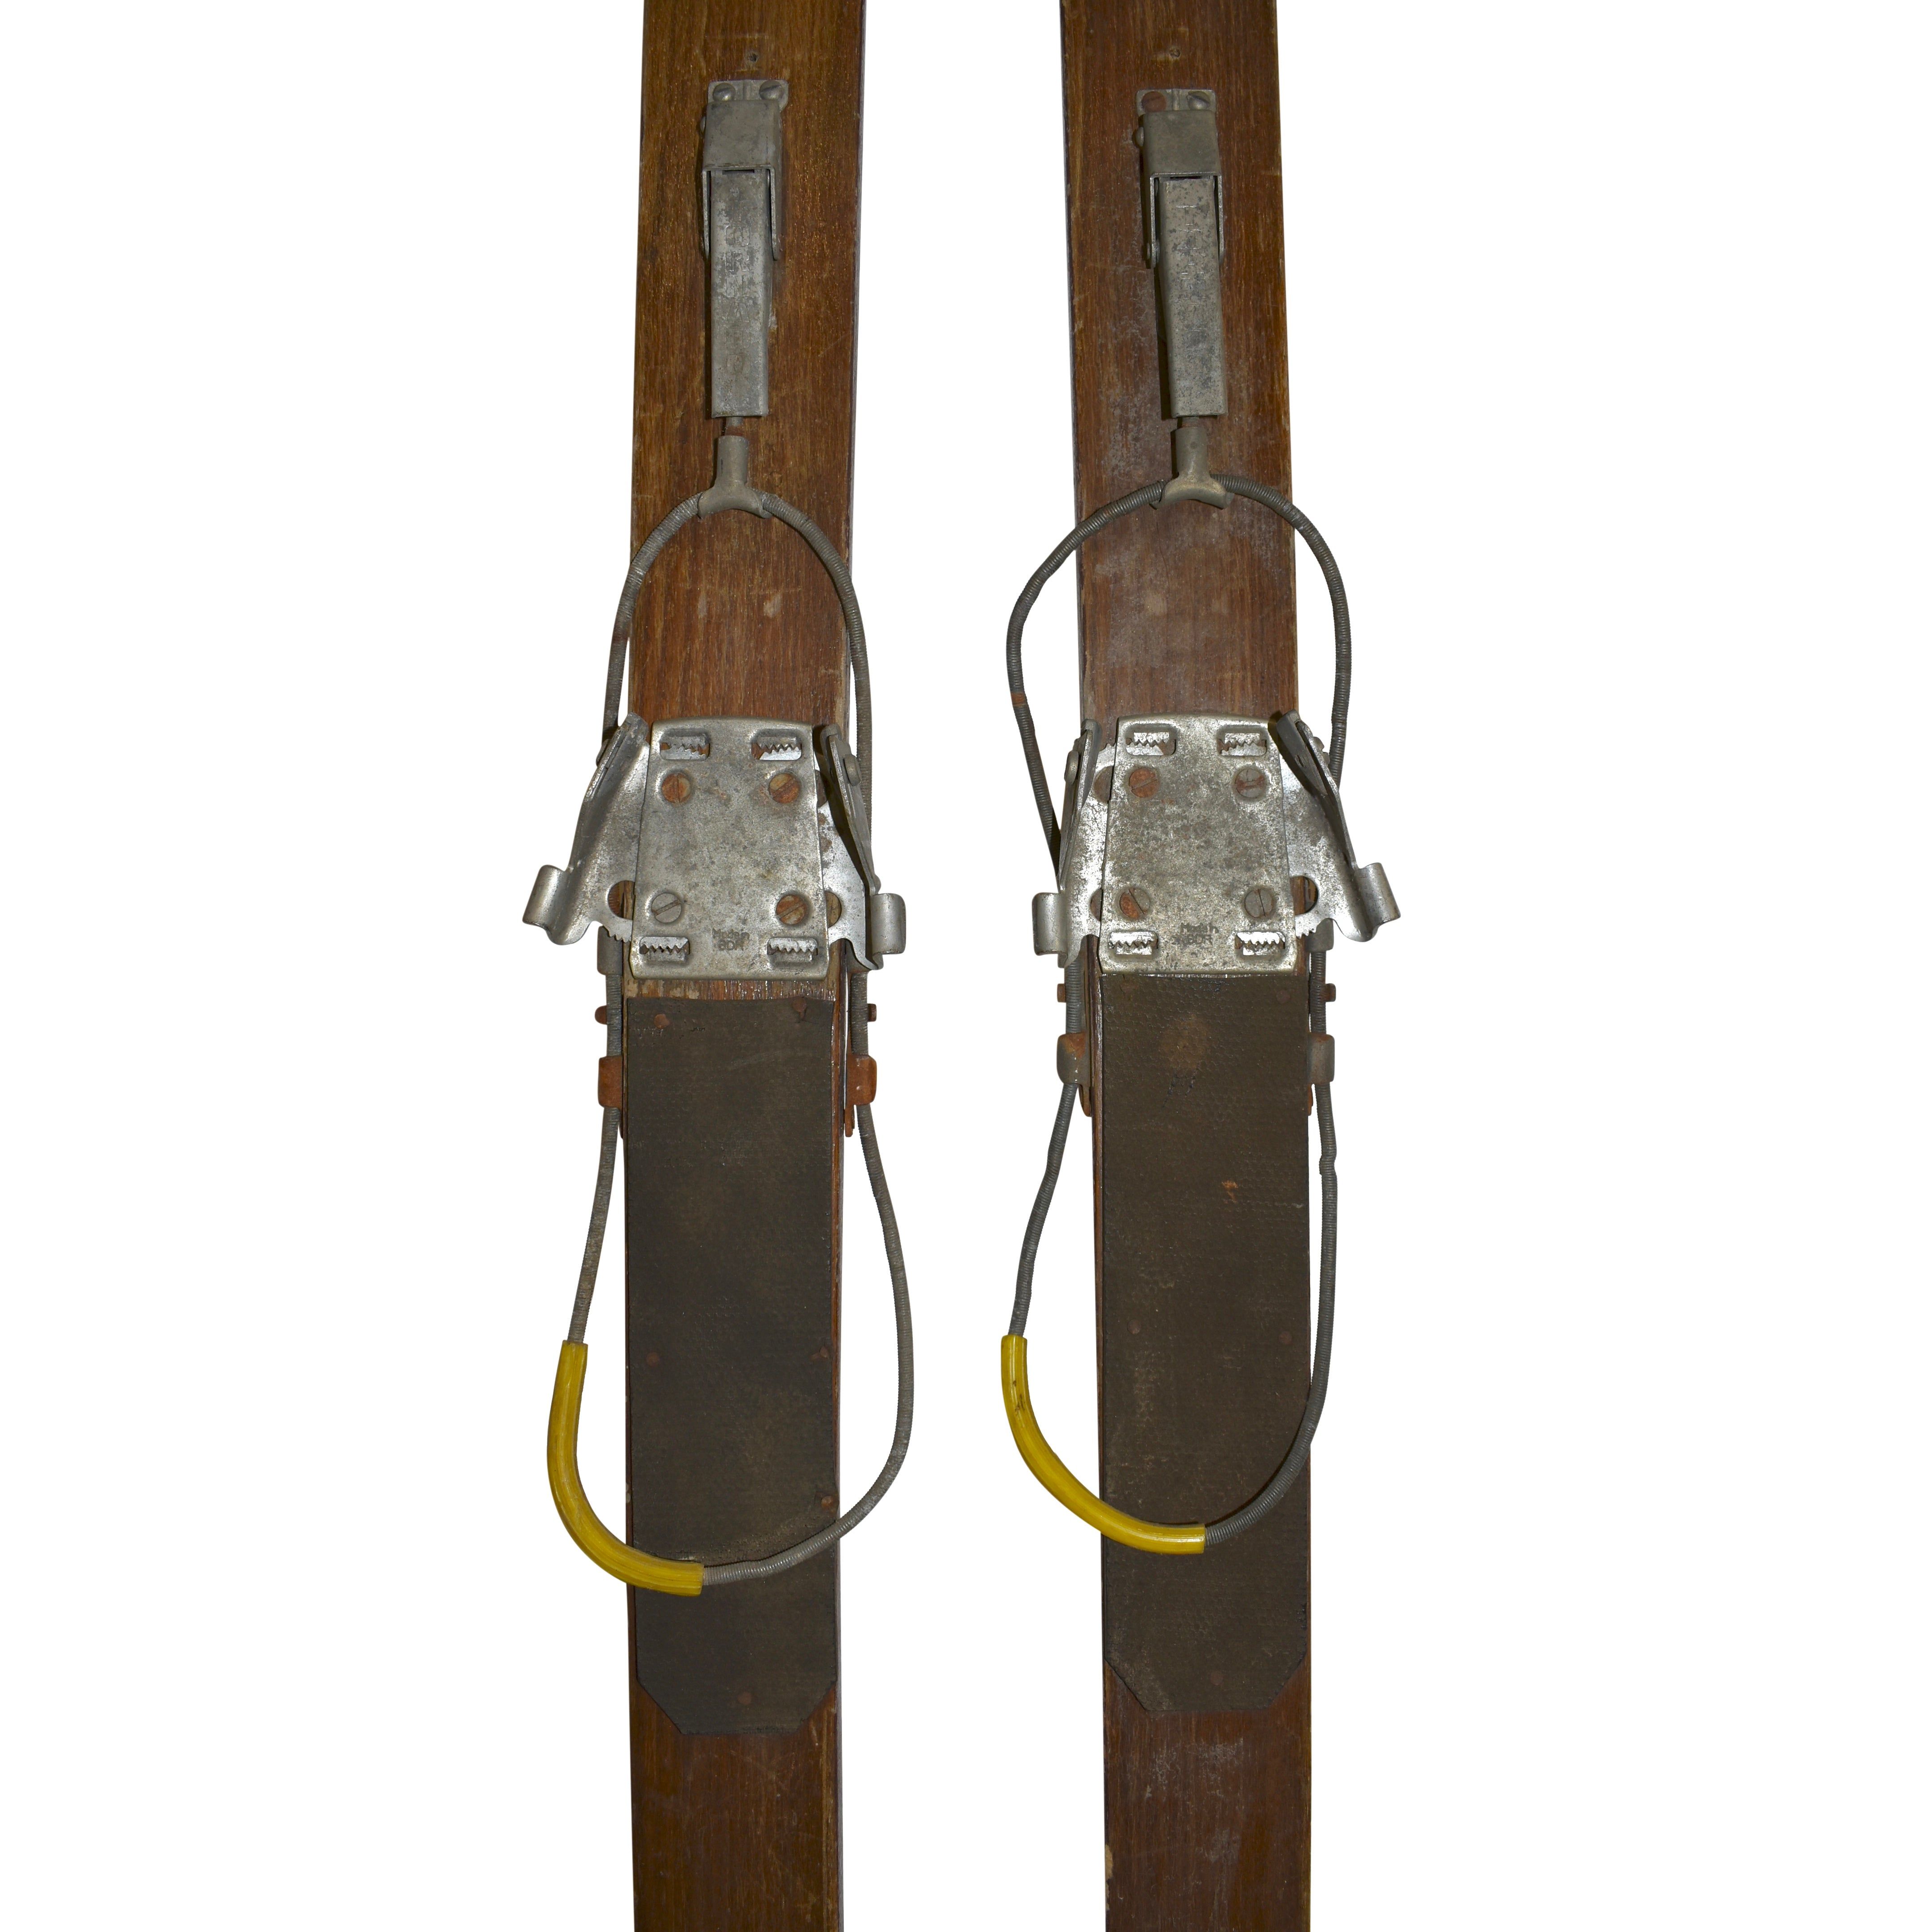 German Skis with Cable Bindings